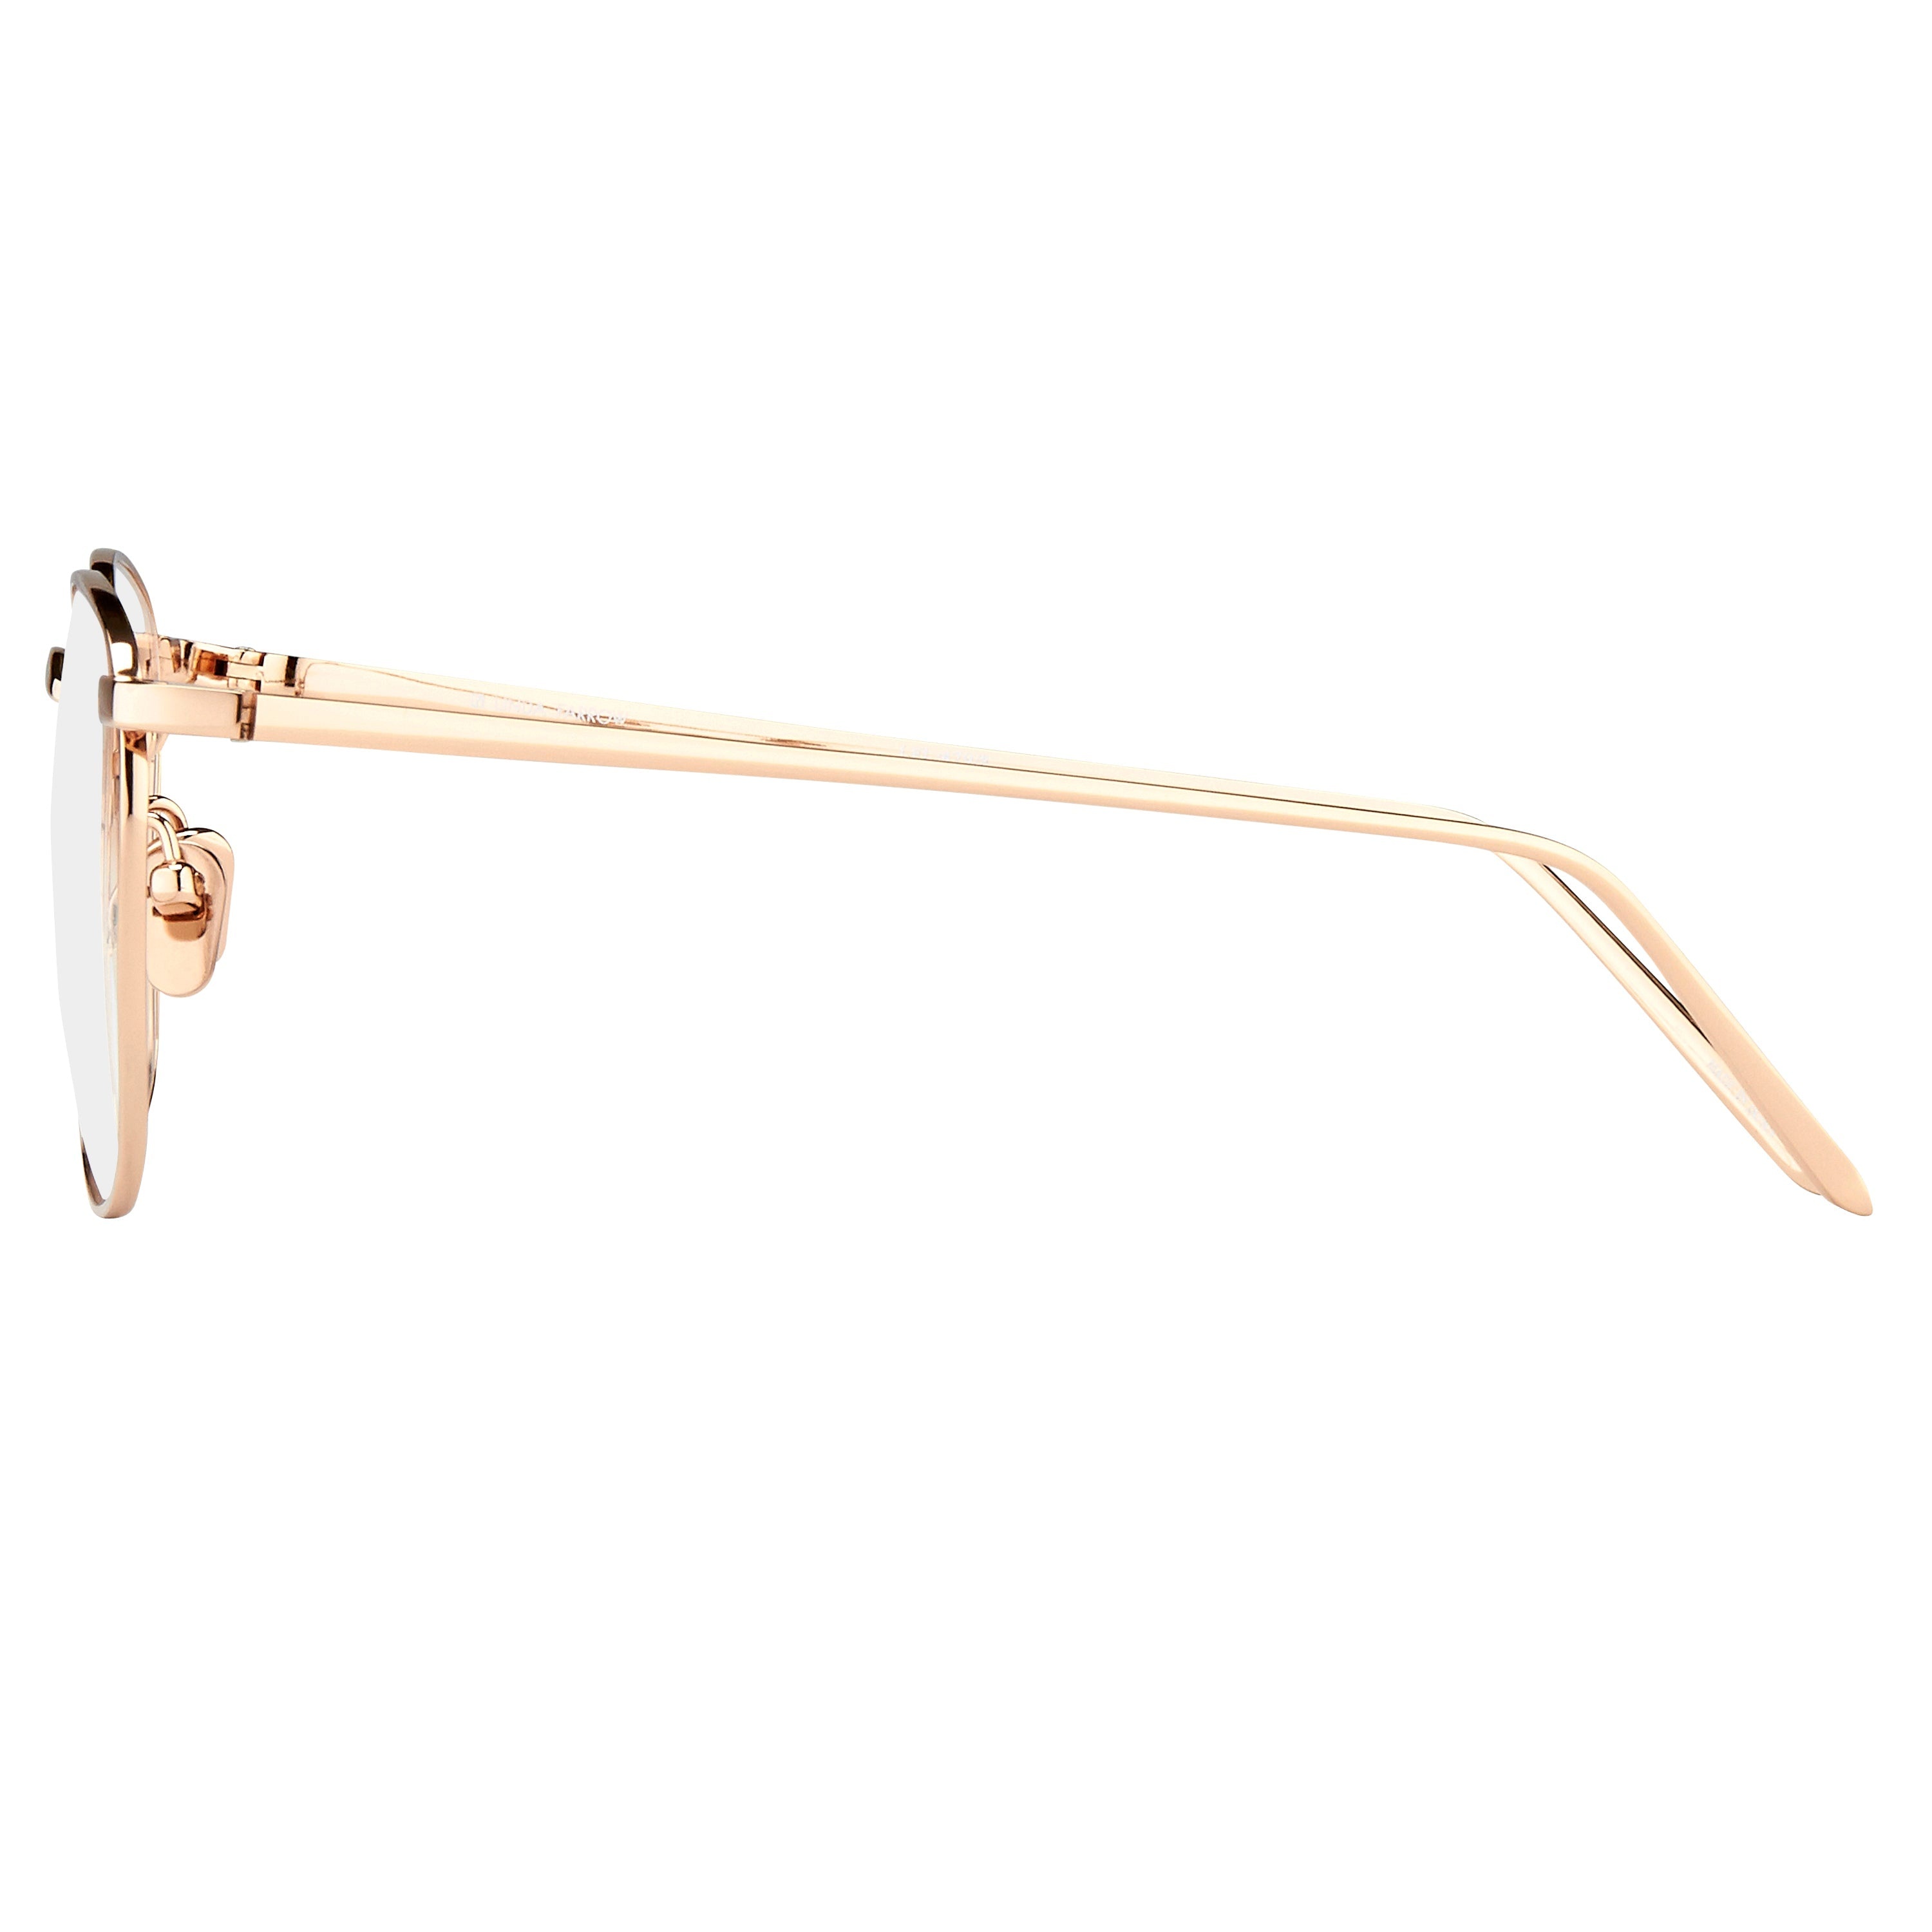 THE SIMON | SQUARE OPTICAL FRAME IN ROSE GOLD (C8) - 3